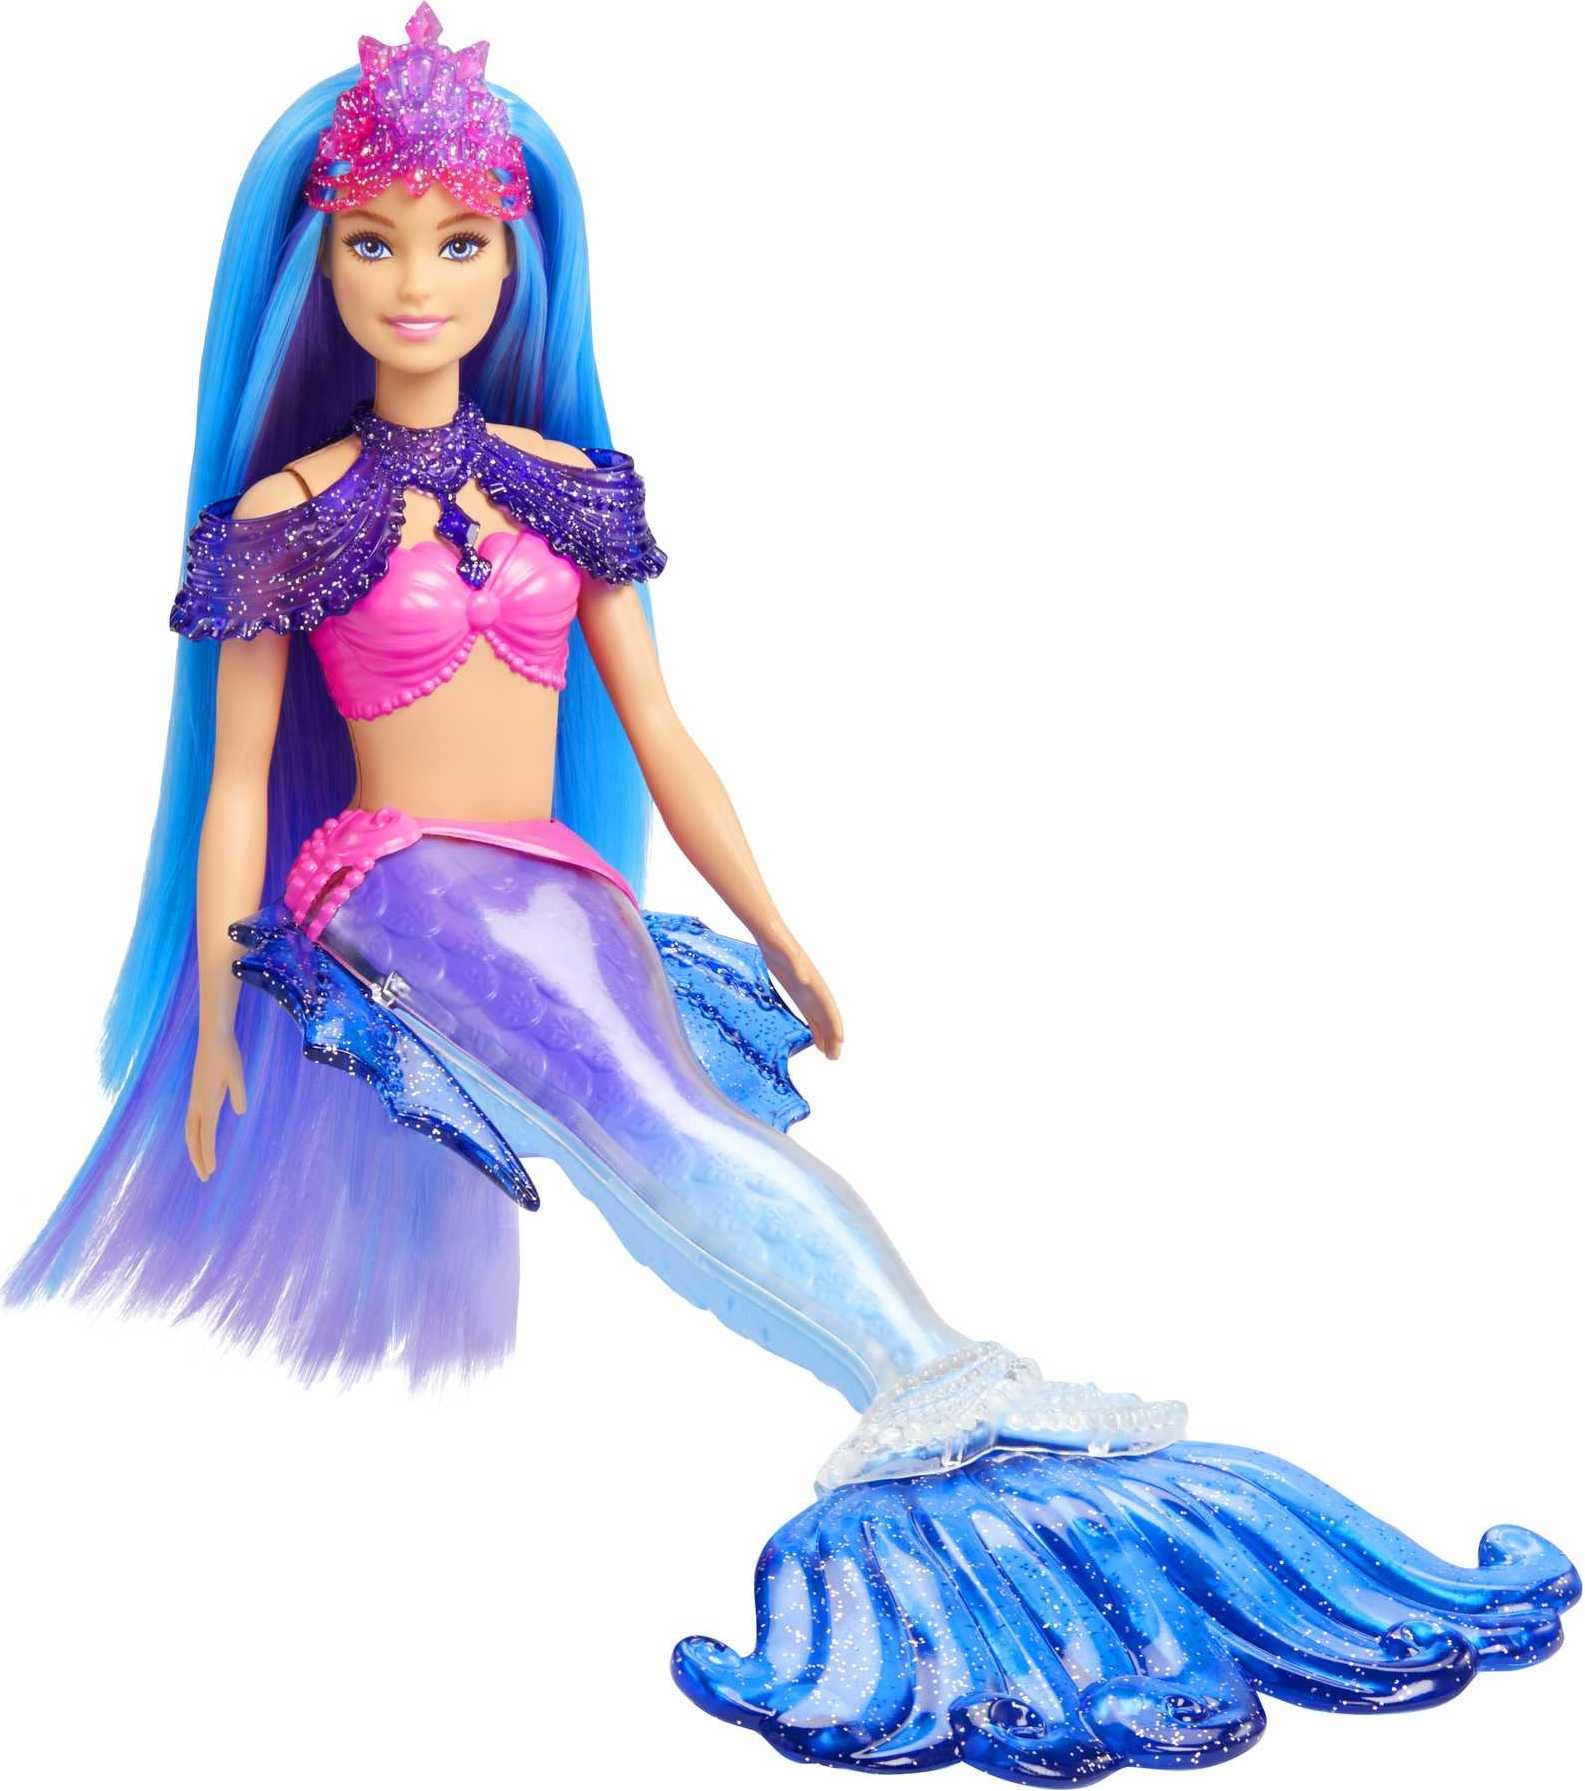 Barbie 'Malibu' Doll with Seahorse Pet and Accessories $9 + Free Shipping w/ Prime or on $25+